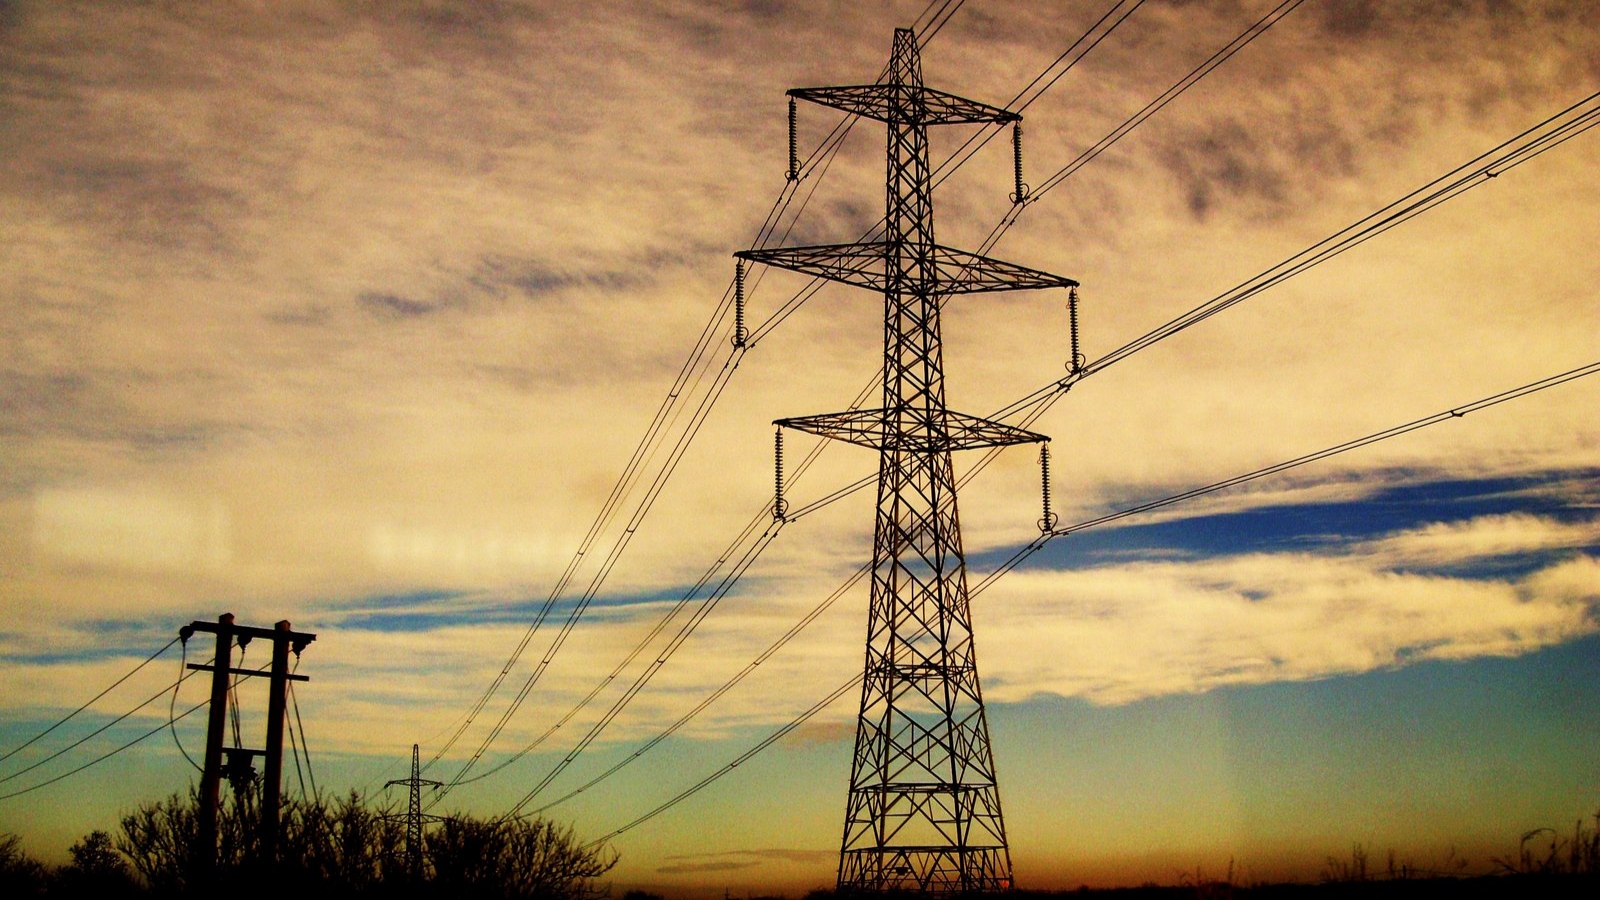 pylons sunset clouds photo by Kat Fry